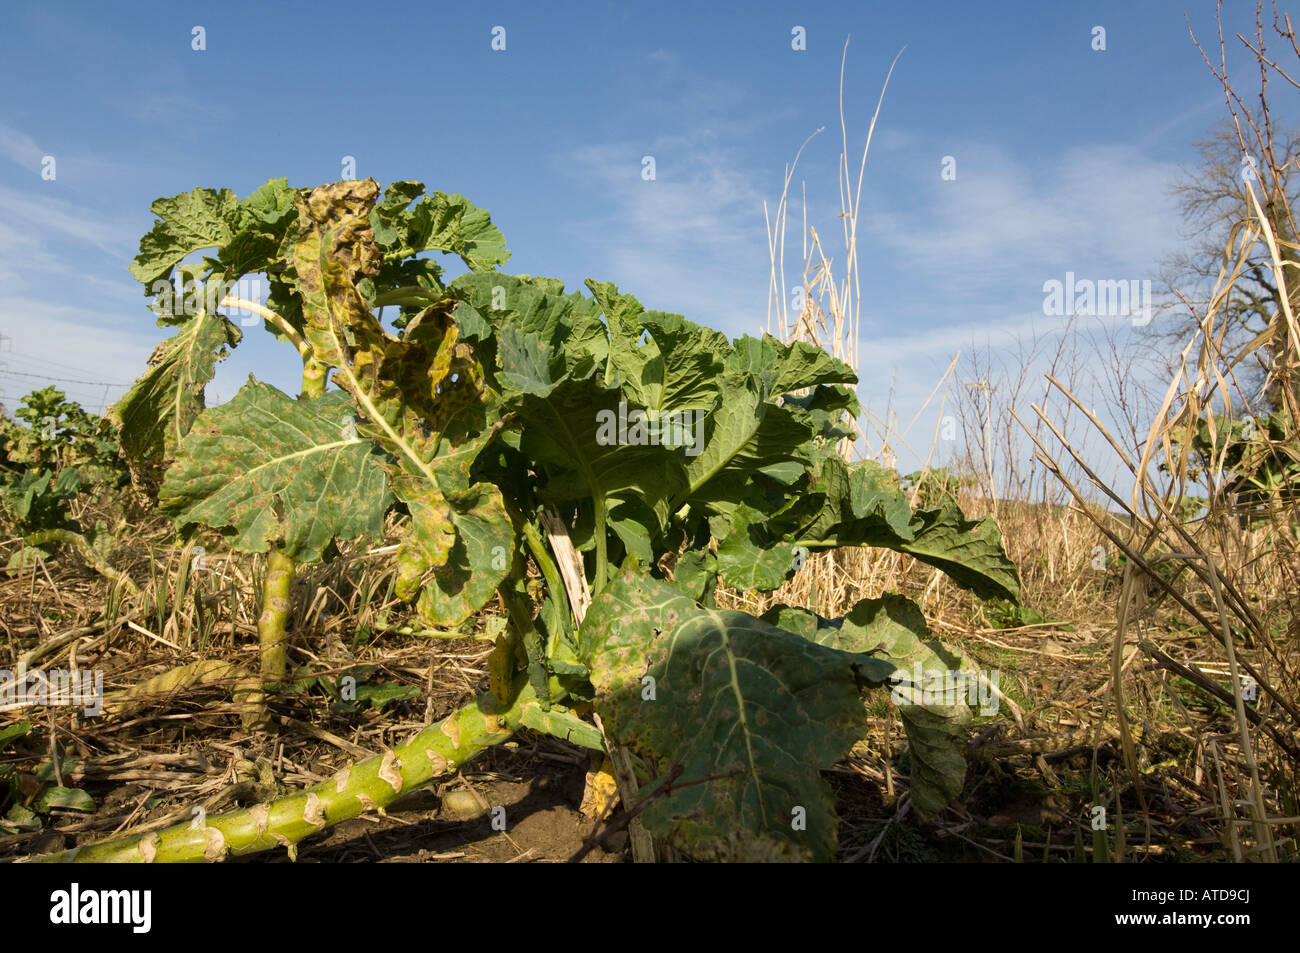 Kale being used as a Cover Crop for game birds and wildlife at the edge of a field Stock Photo